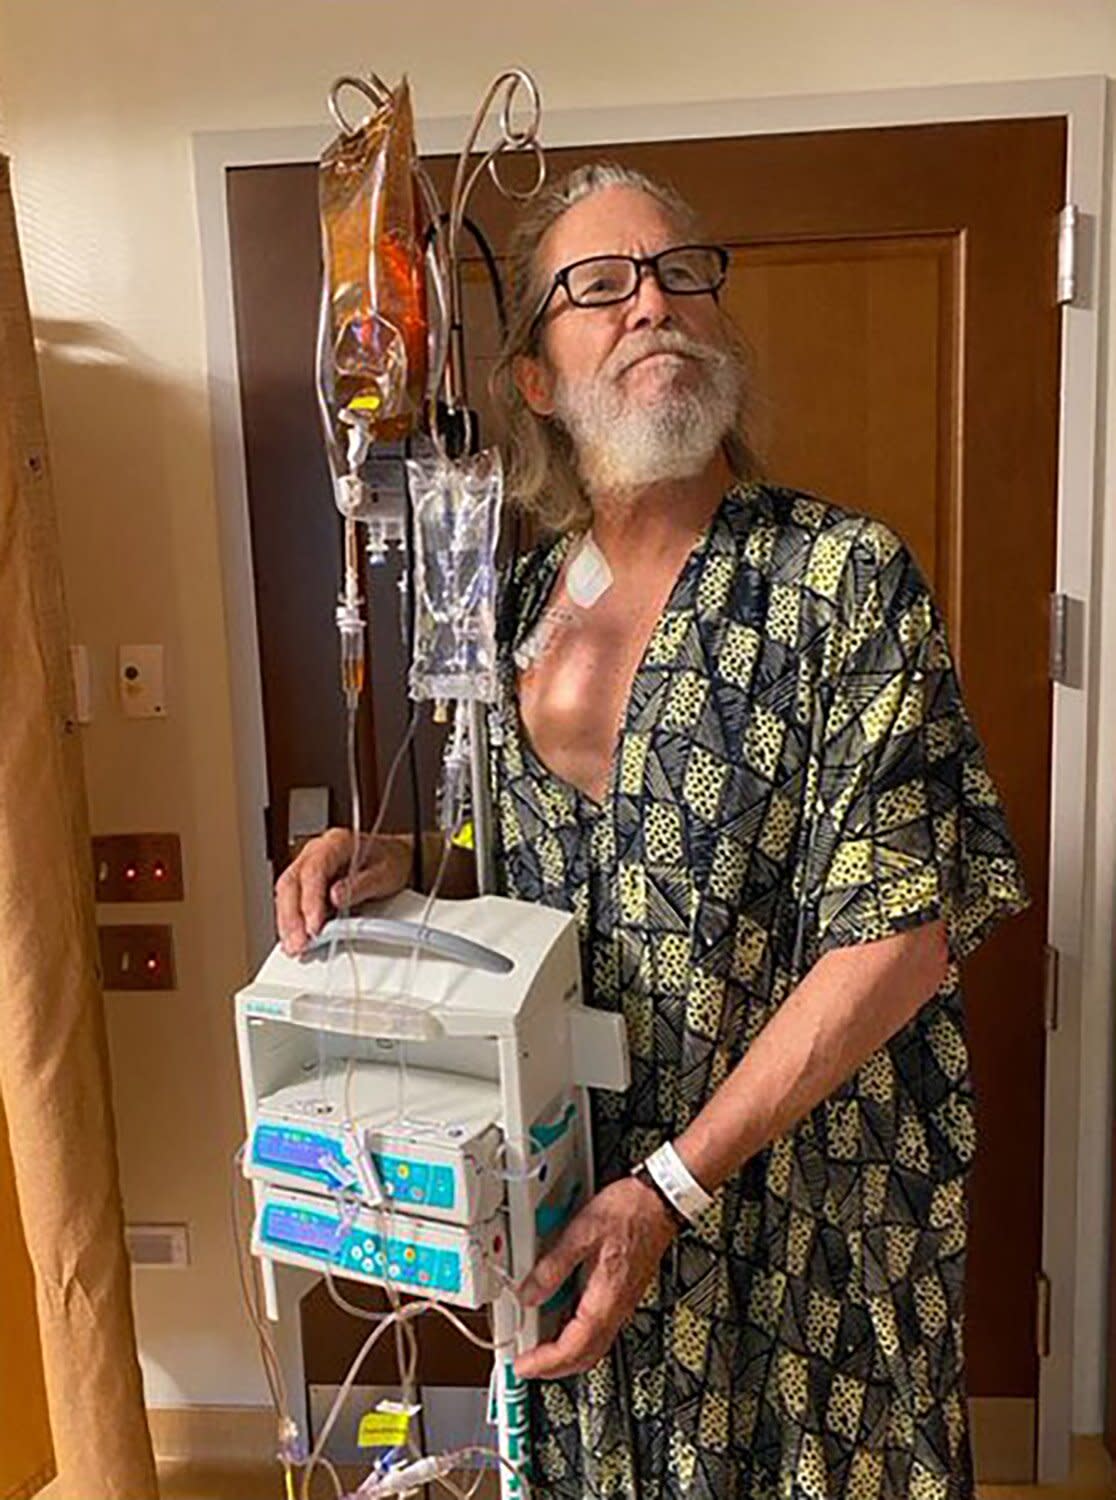 Jeff Bridges Shares Wellness Update and a Image as He Undergoes Cancer